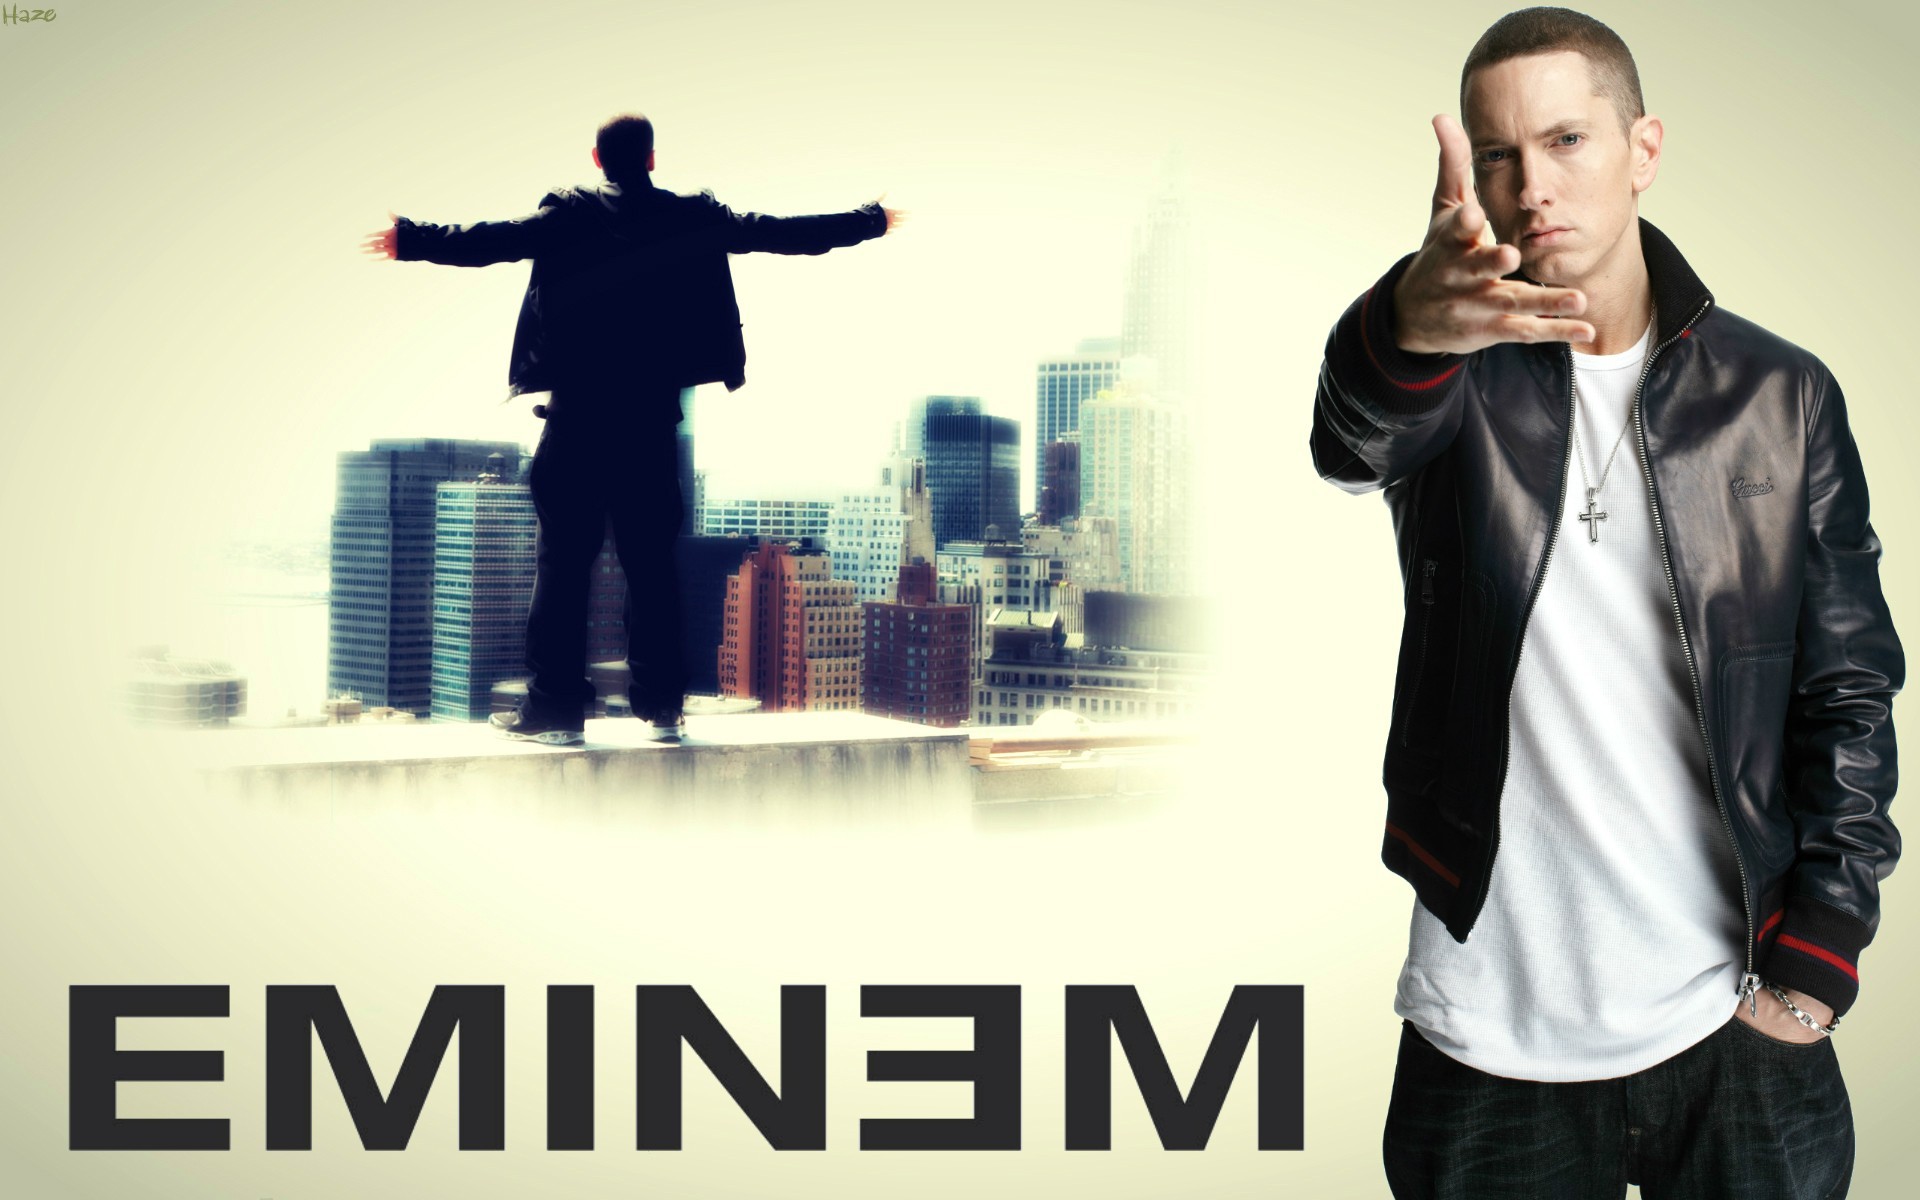 1920x1200 Buildings hip hop eminem rapper marshall mathers slim shady recovery  wallpaper |  | 13945 | WallpaperUP